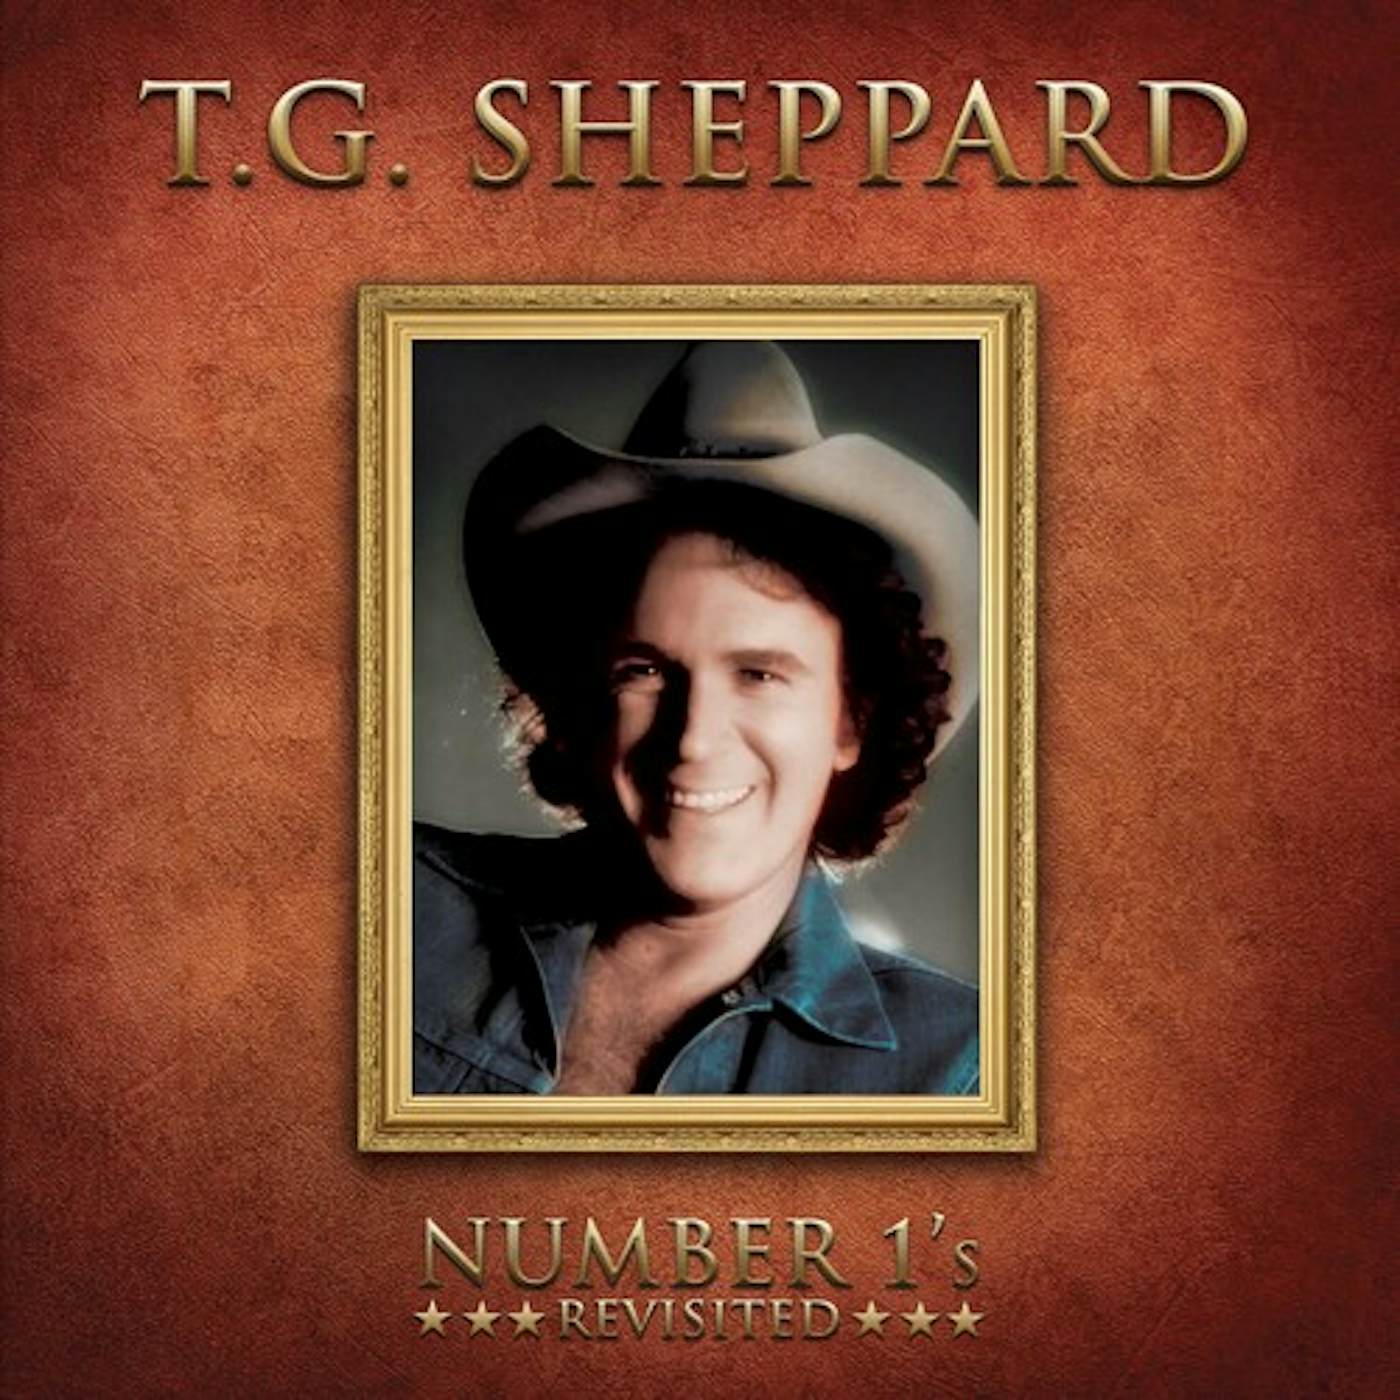 T.G. Sheppard NUMBER 1'S REVISITED - RED MARBLE Vinyl Record